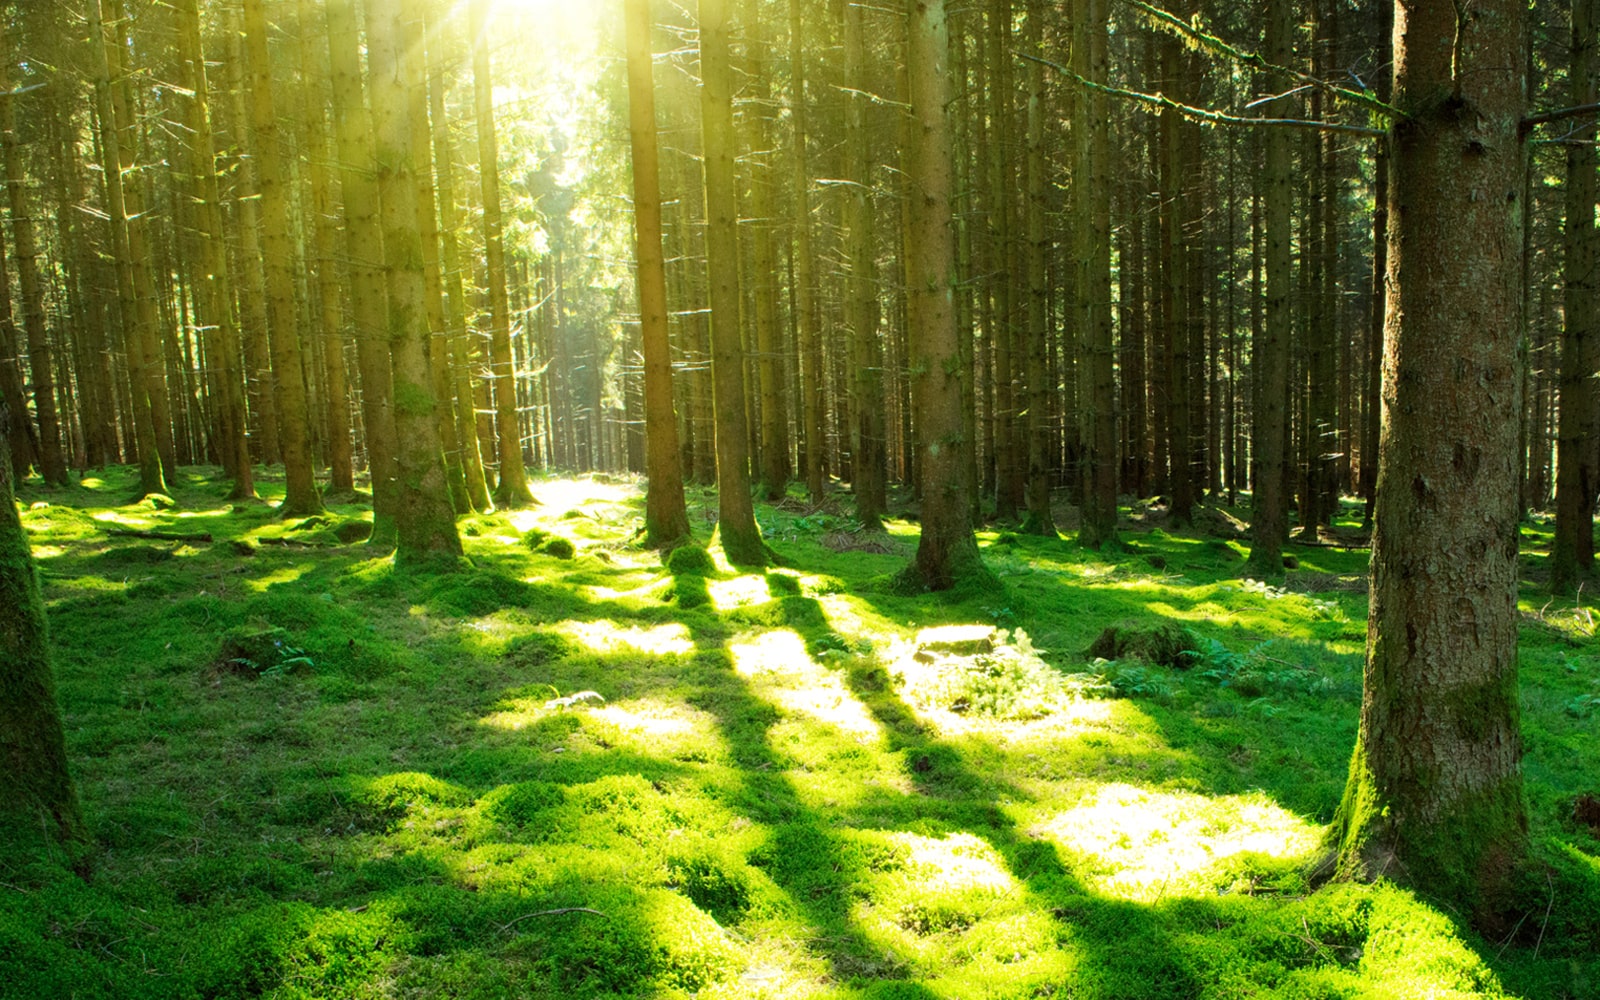 sun shines through the evergreen forest.